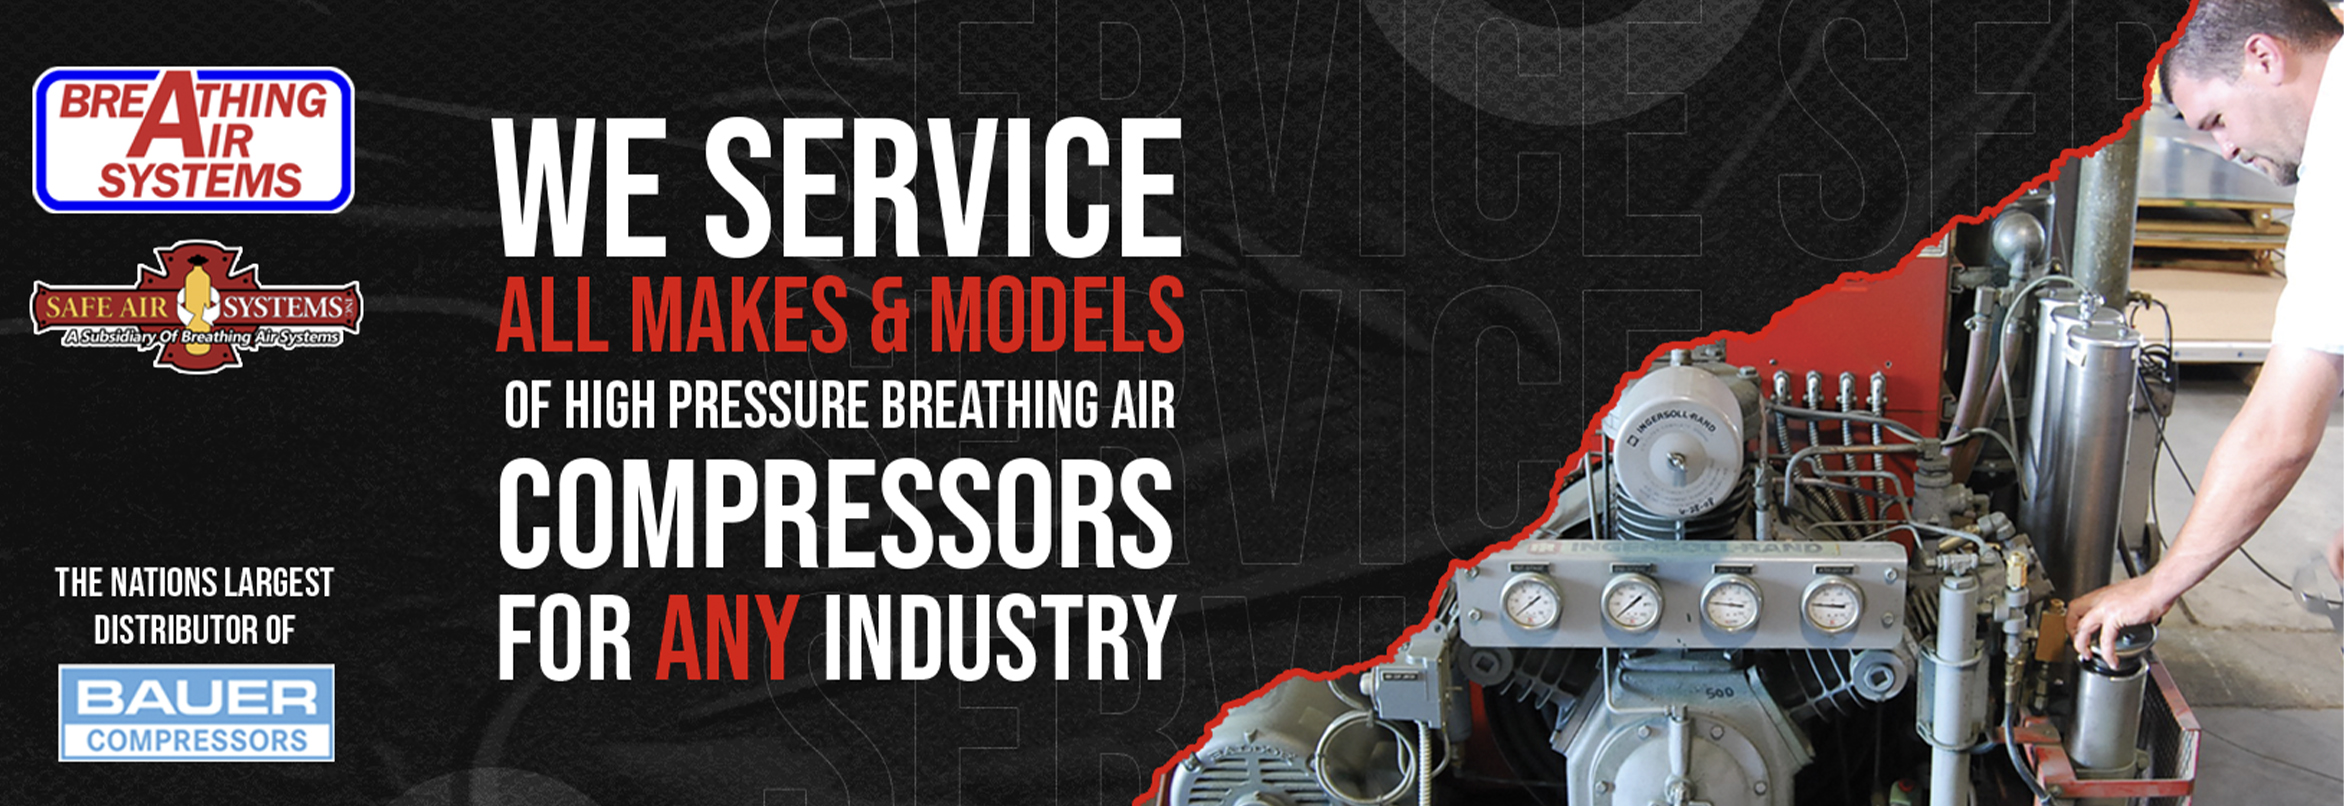 Breathing Air Compressor Service Department | Breathing Air Systems